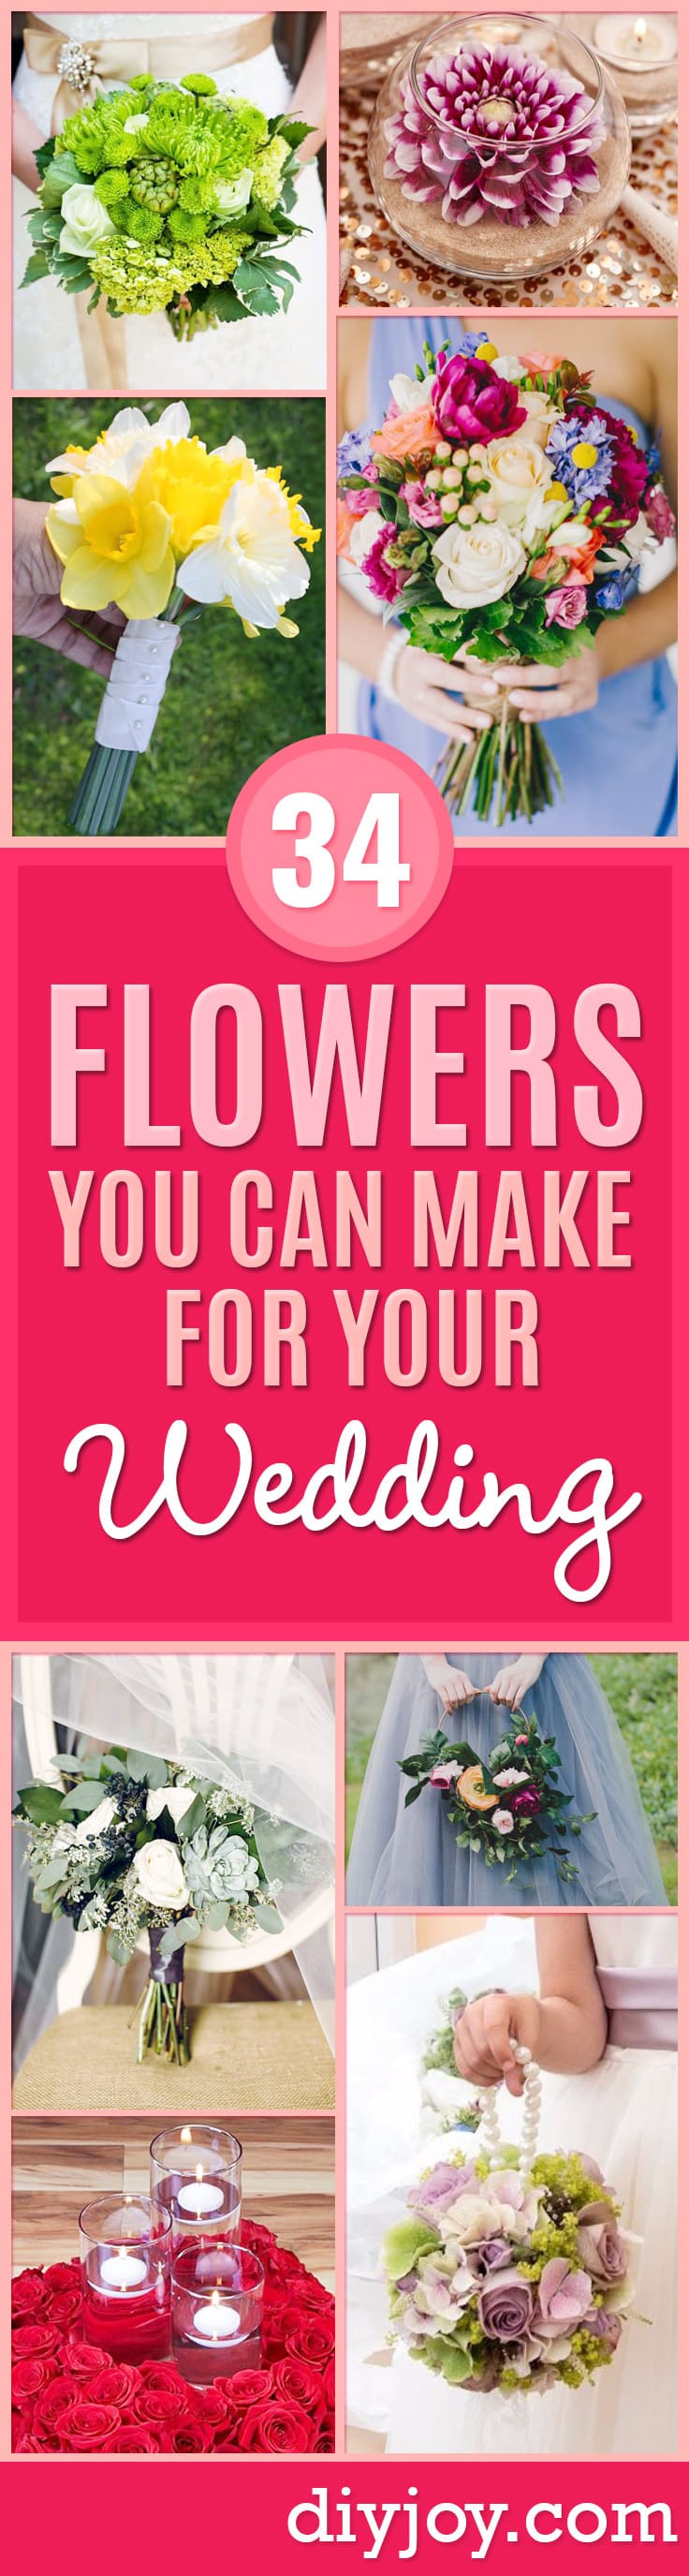 DIY Flowers for Weddings - Centerpieces, Bouquets, Arrangements for Wedding Ceremony - Aisle Ideas, Rustic Bouquet Projects - Paper, Cheap, Fake Floral, Silk Flower Centerpiece To Make For Brides on A Budget - Decor for Spring, Summer, Winter and Fall http://diyjoy.com/diy-flowers-for-weddings